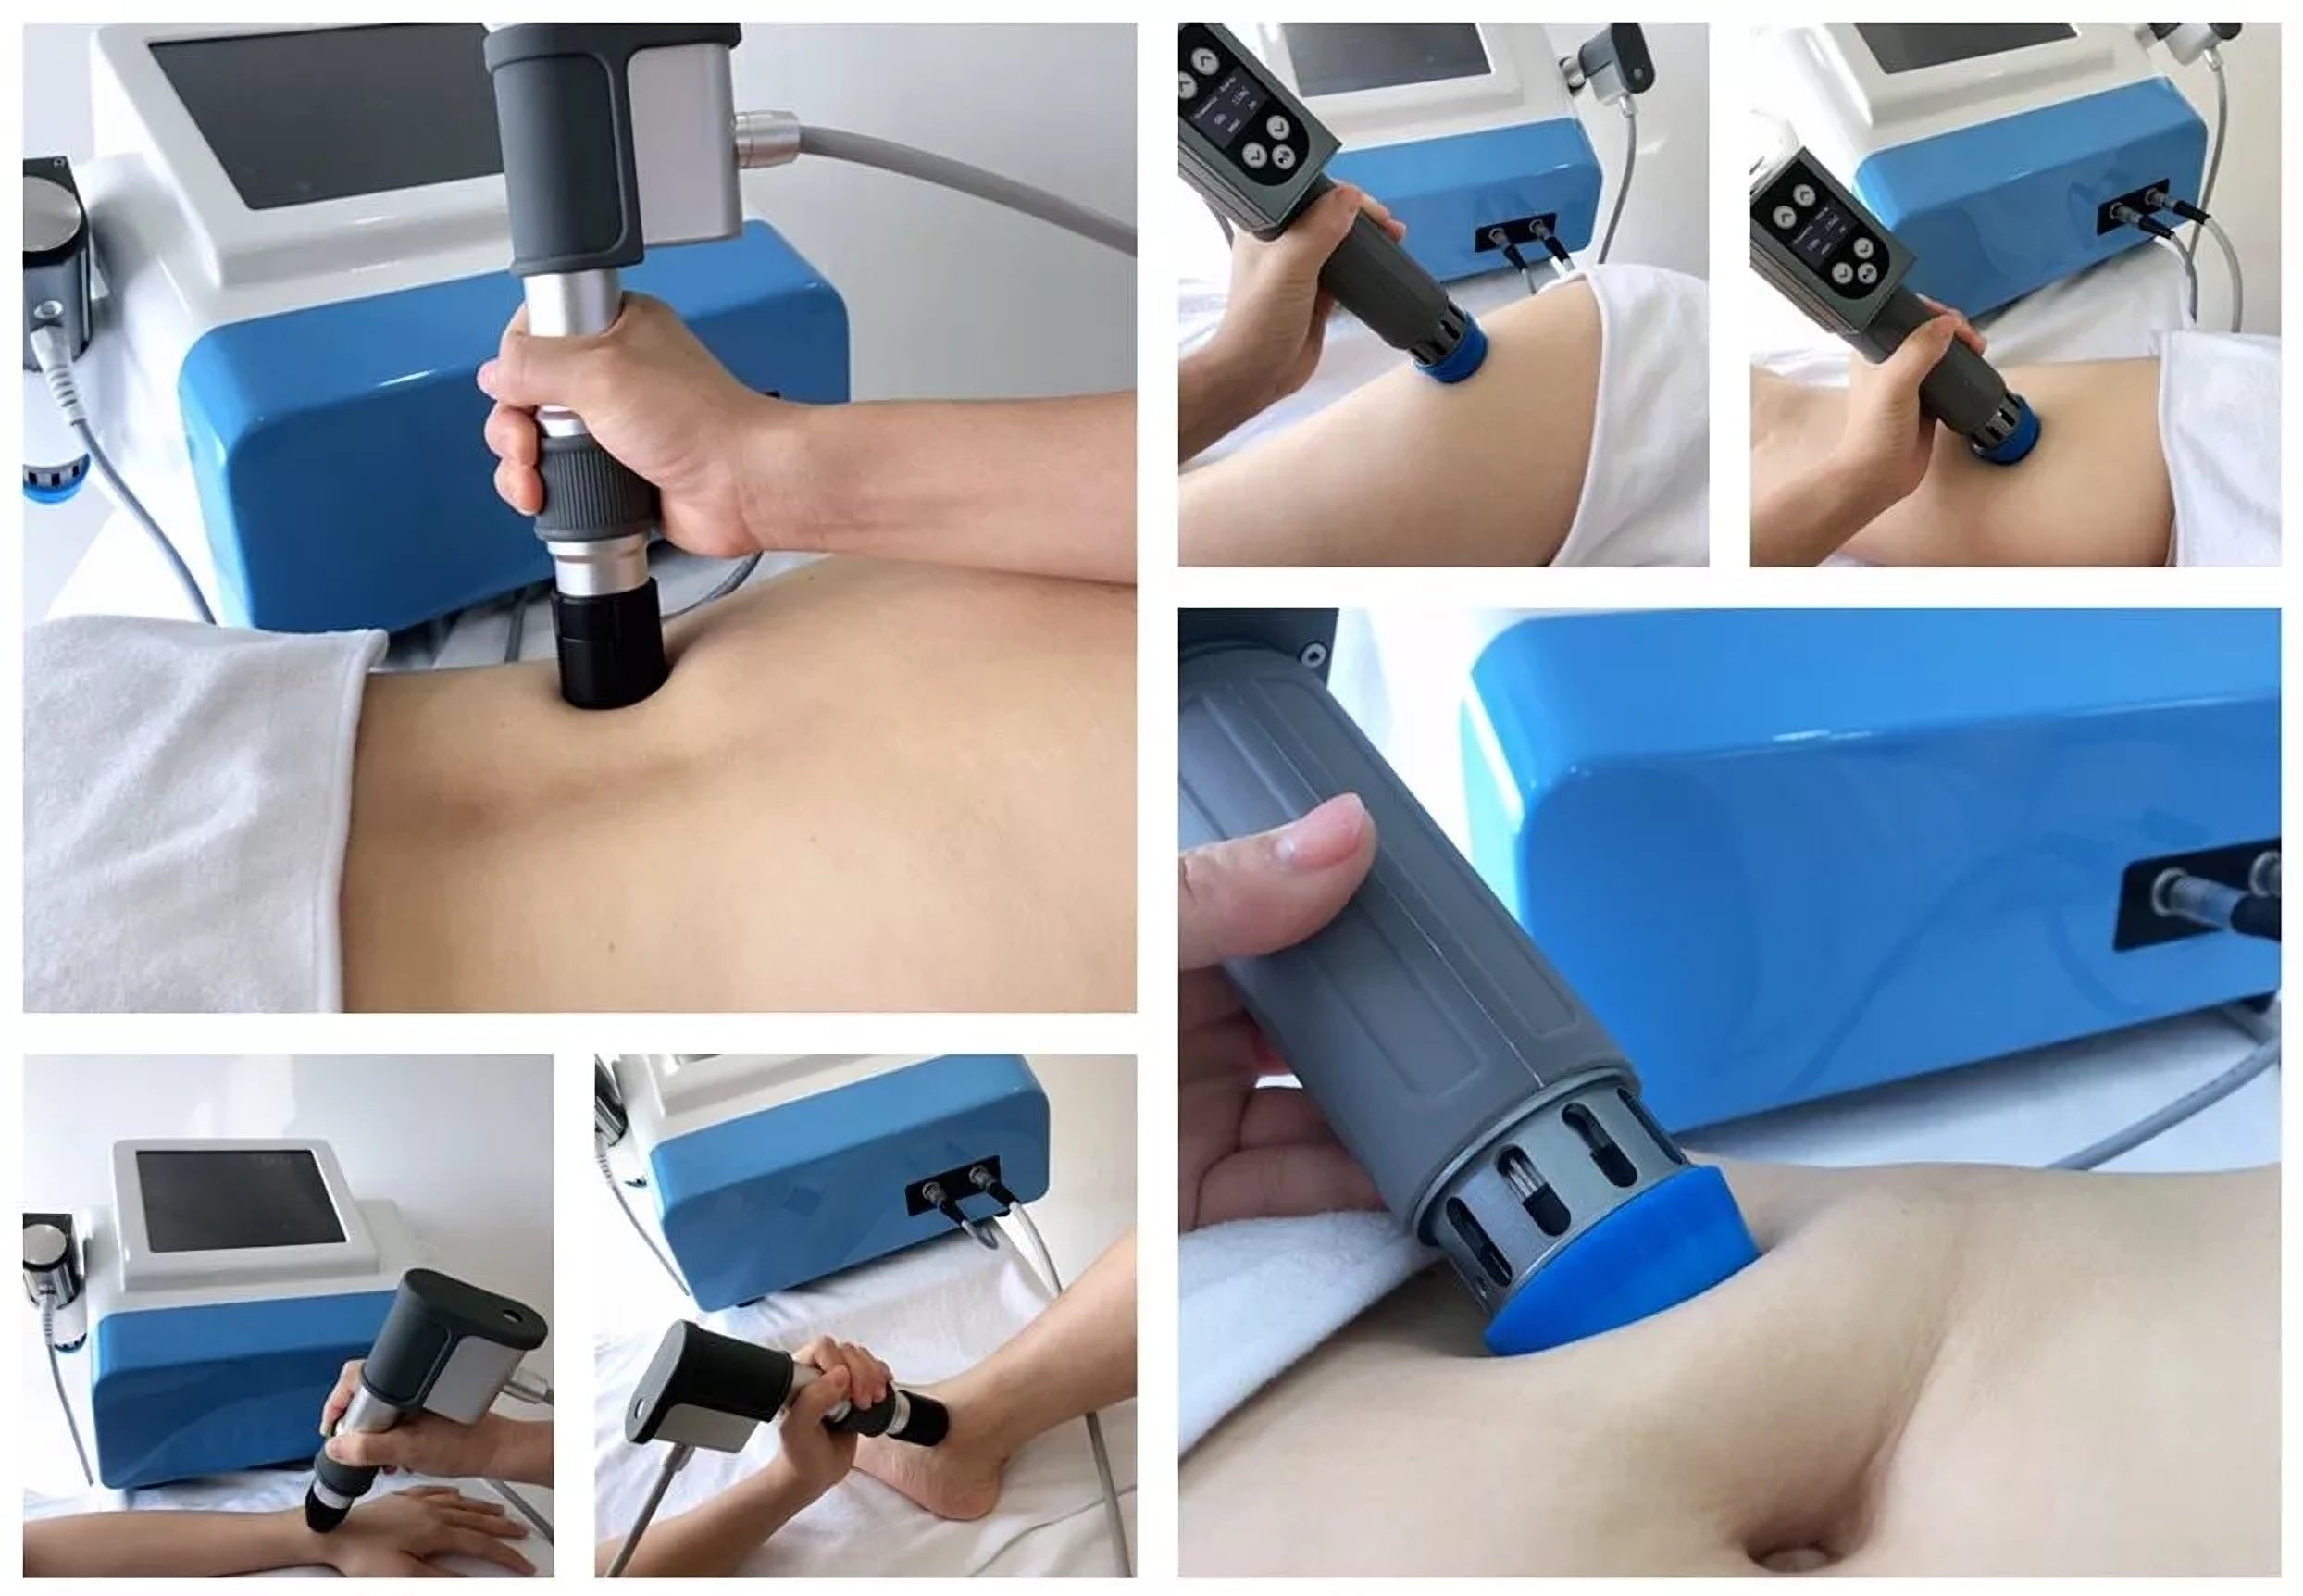 2in1 Portable Shockwave Therapy Machine (Electromagnetic + Pneumatic)